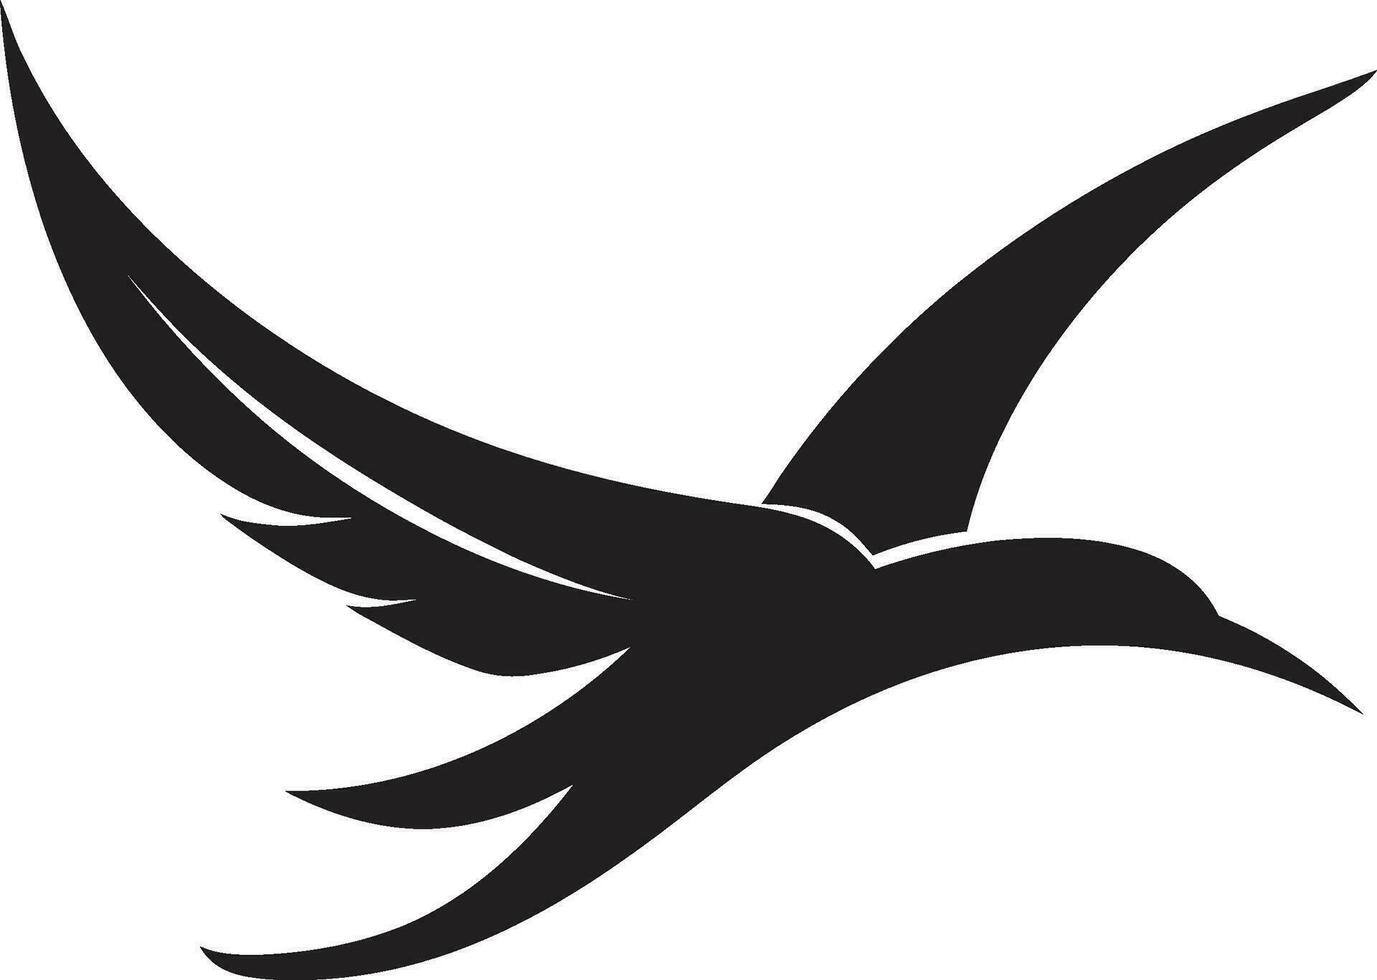 Sculpted Resonance Black Emblem in Seagull Ebon Serenity Seagull Icon in Vector